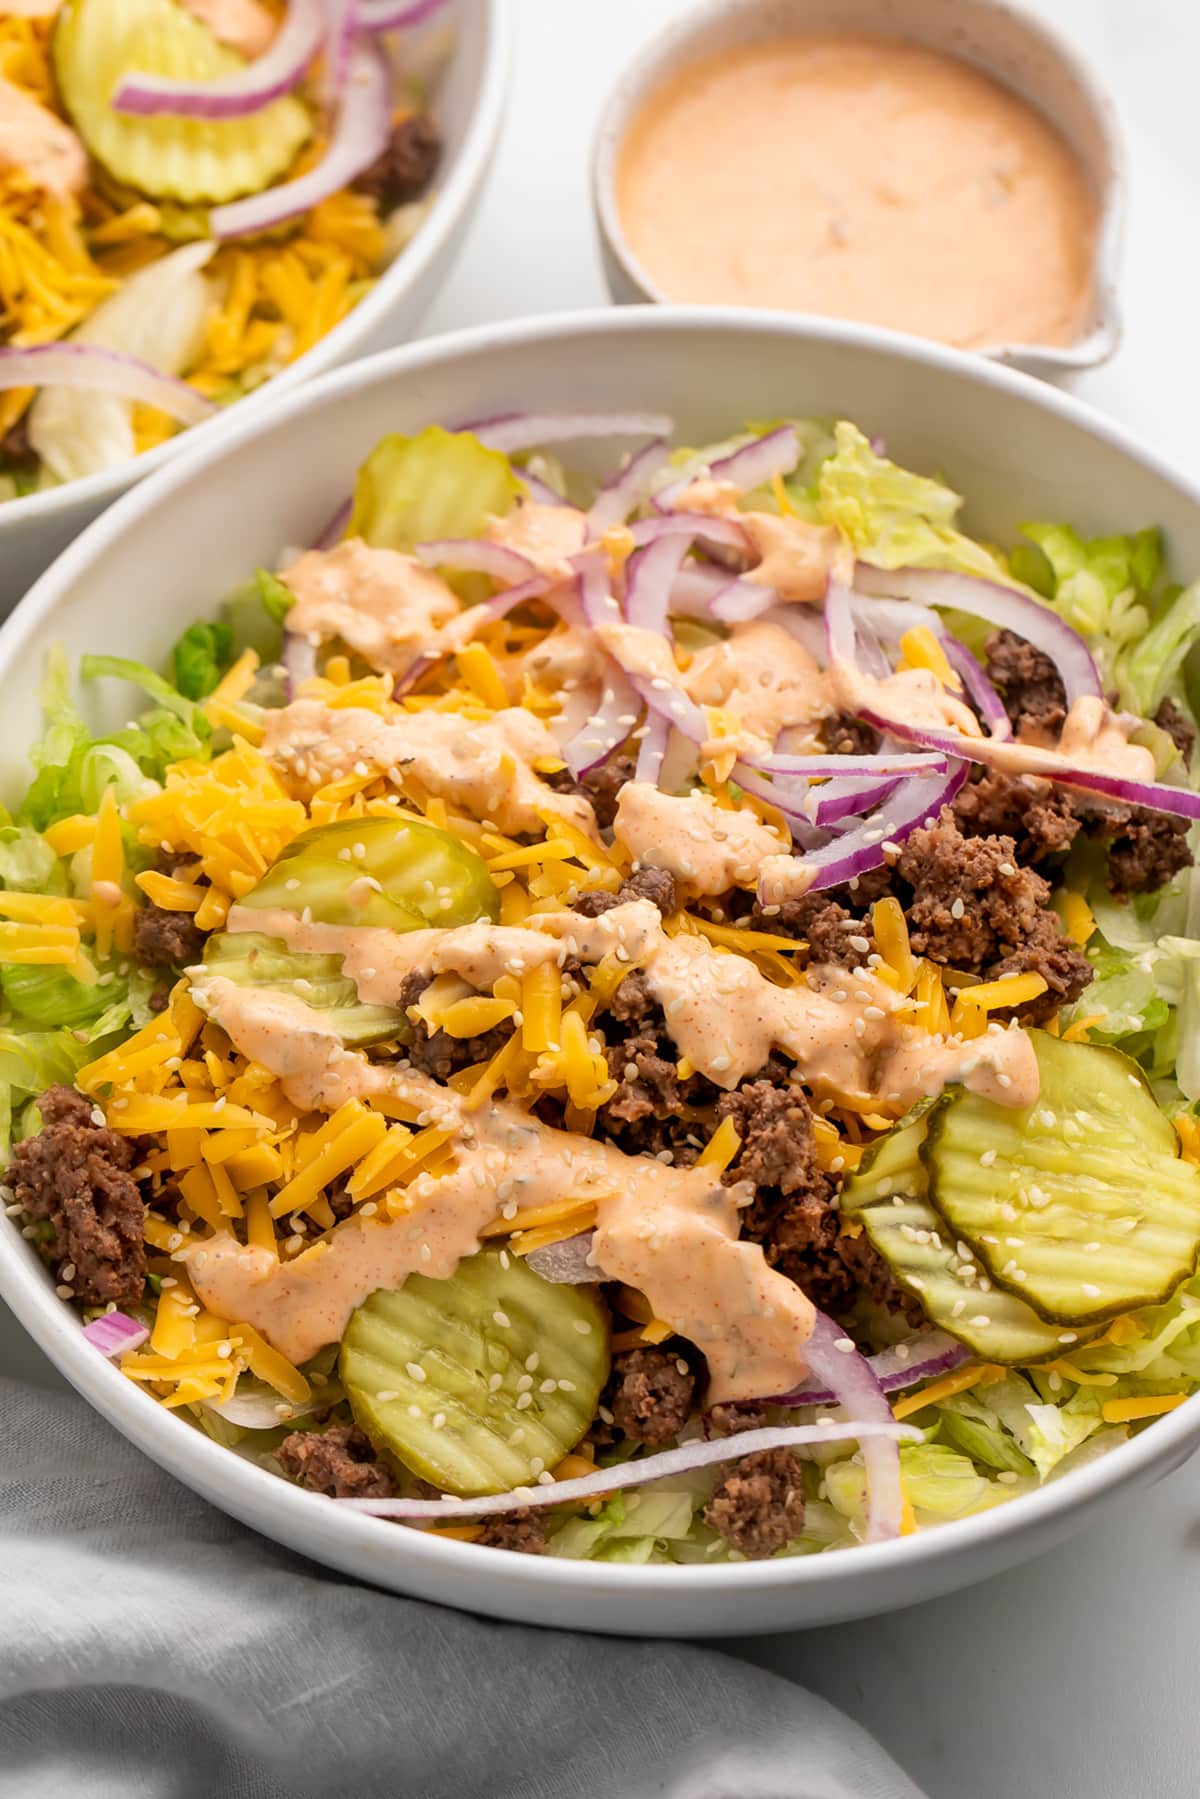 Angled view of a large Big Mac cheeseburger salad in a bowl with copycat Big Mac sauce in the background.